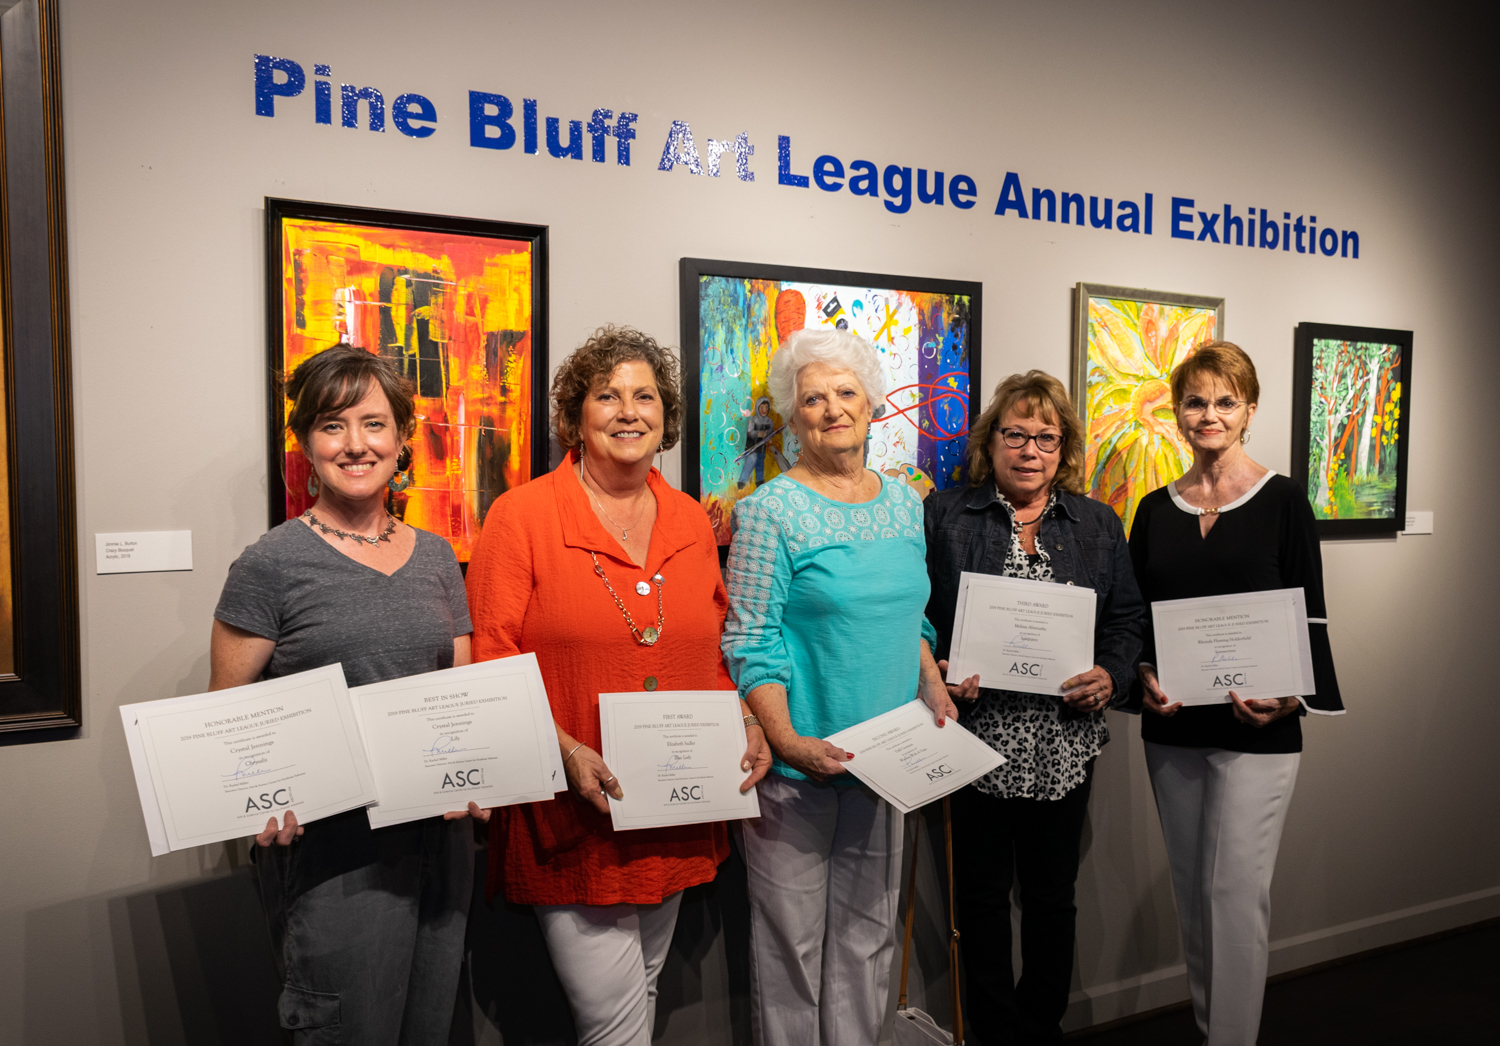  The winners of the 2019 Pine Bluff Art League Annual Exhibition are (from left) Crystal Jennings (Best in Show and Honorable Mention), Elizabeth Sadler (First Place), Dell Gorman (Second Place), Melissa Abernathy (Third Place), and Rhonda Fleming Ho